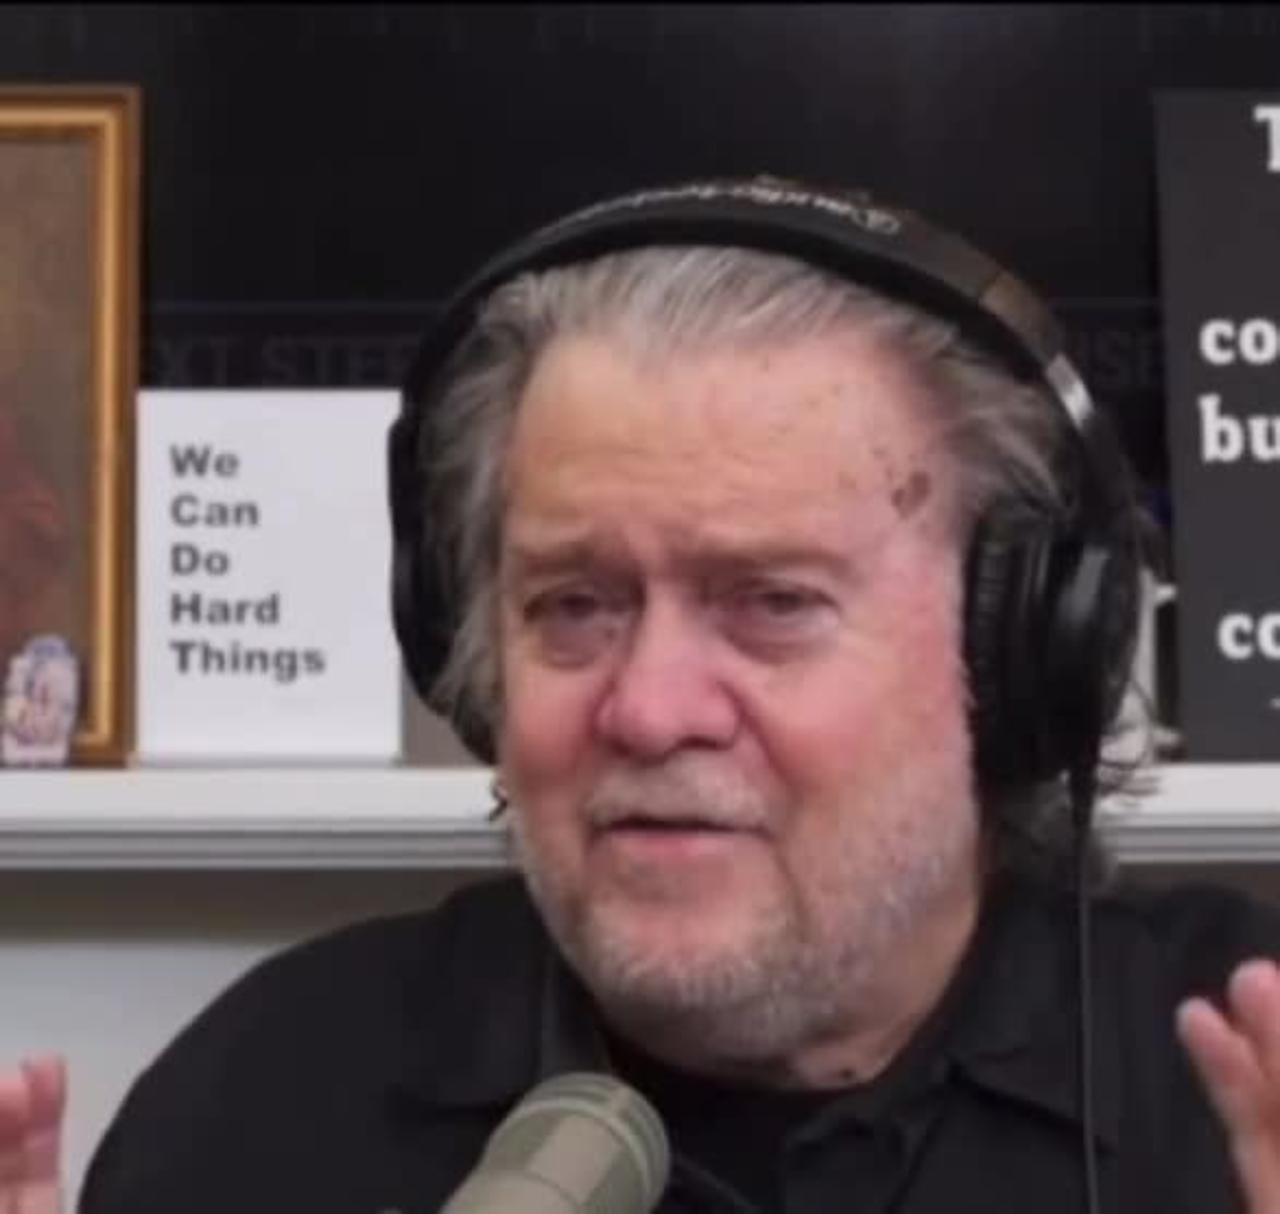 Ukraine Conflict - Steve Bannon Gives A Red Pill...